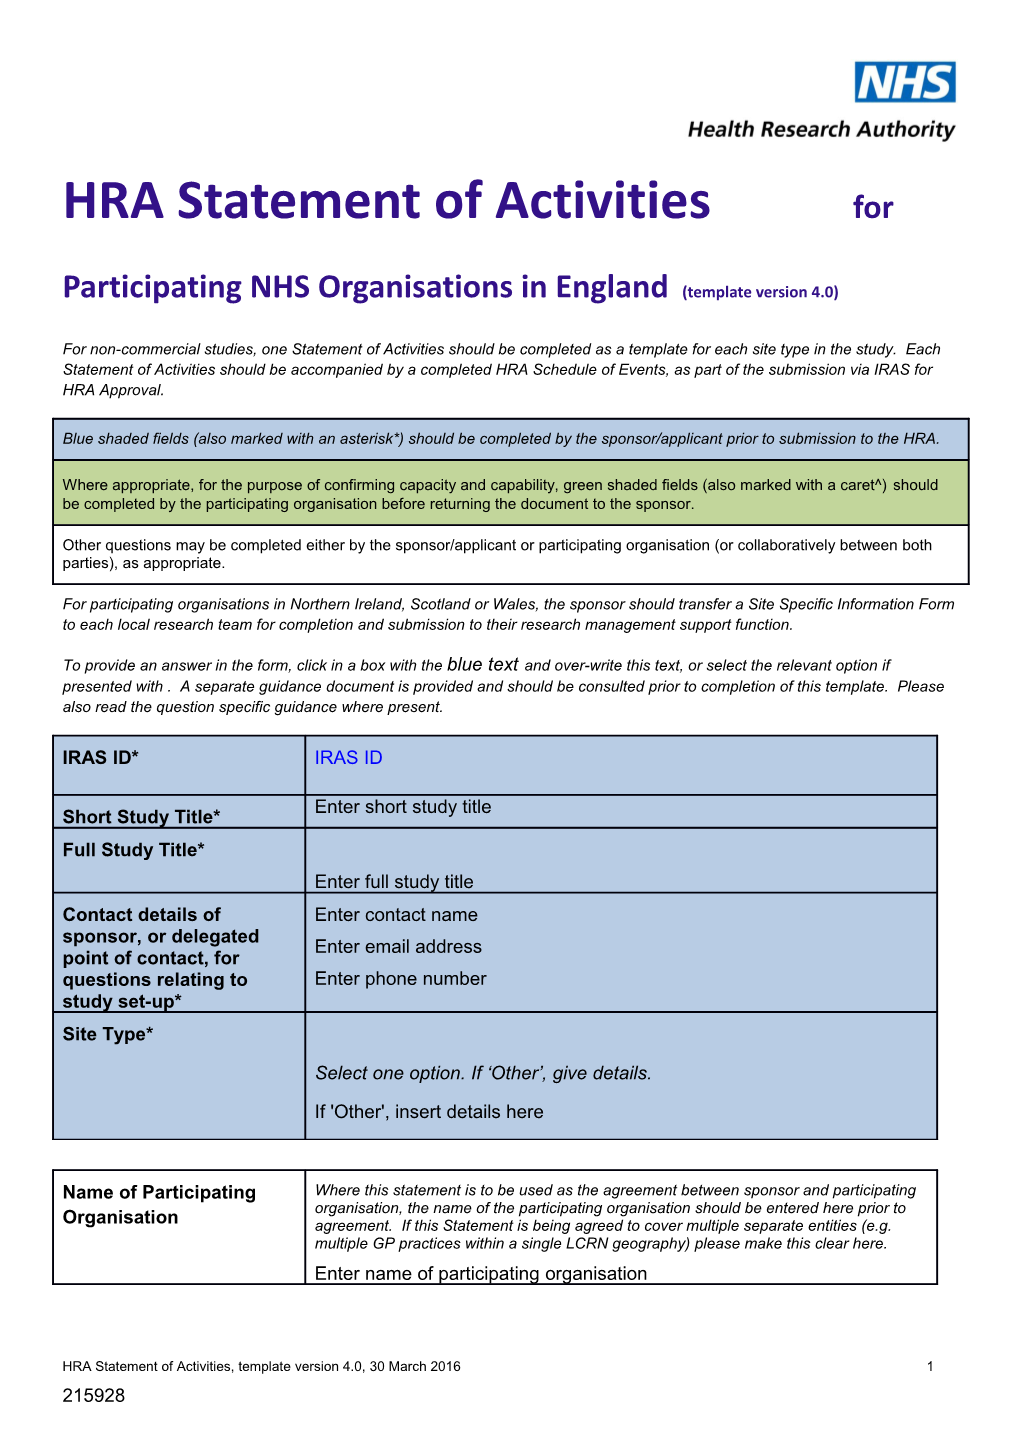 HRA Statement of Activities for Participating NHS Organisations in England (Template Version